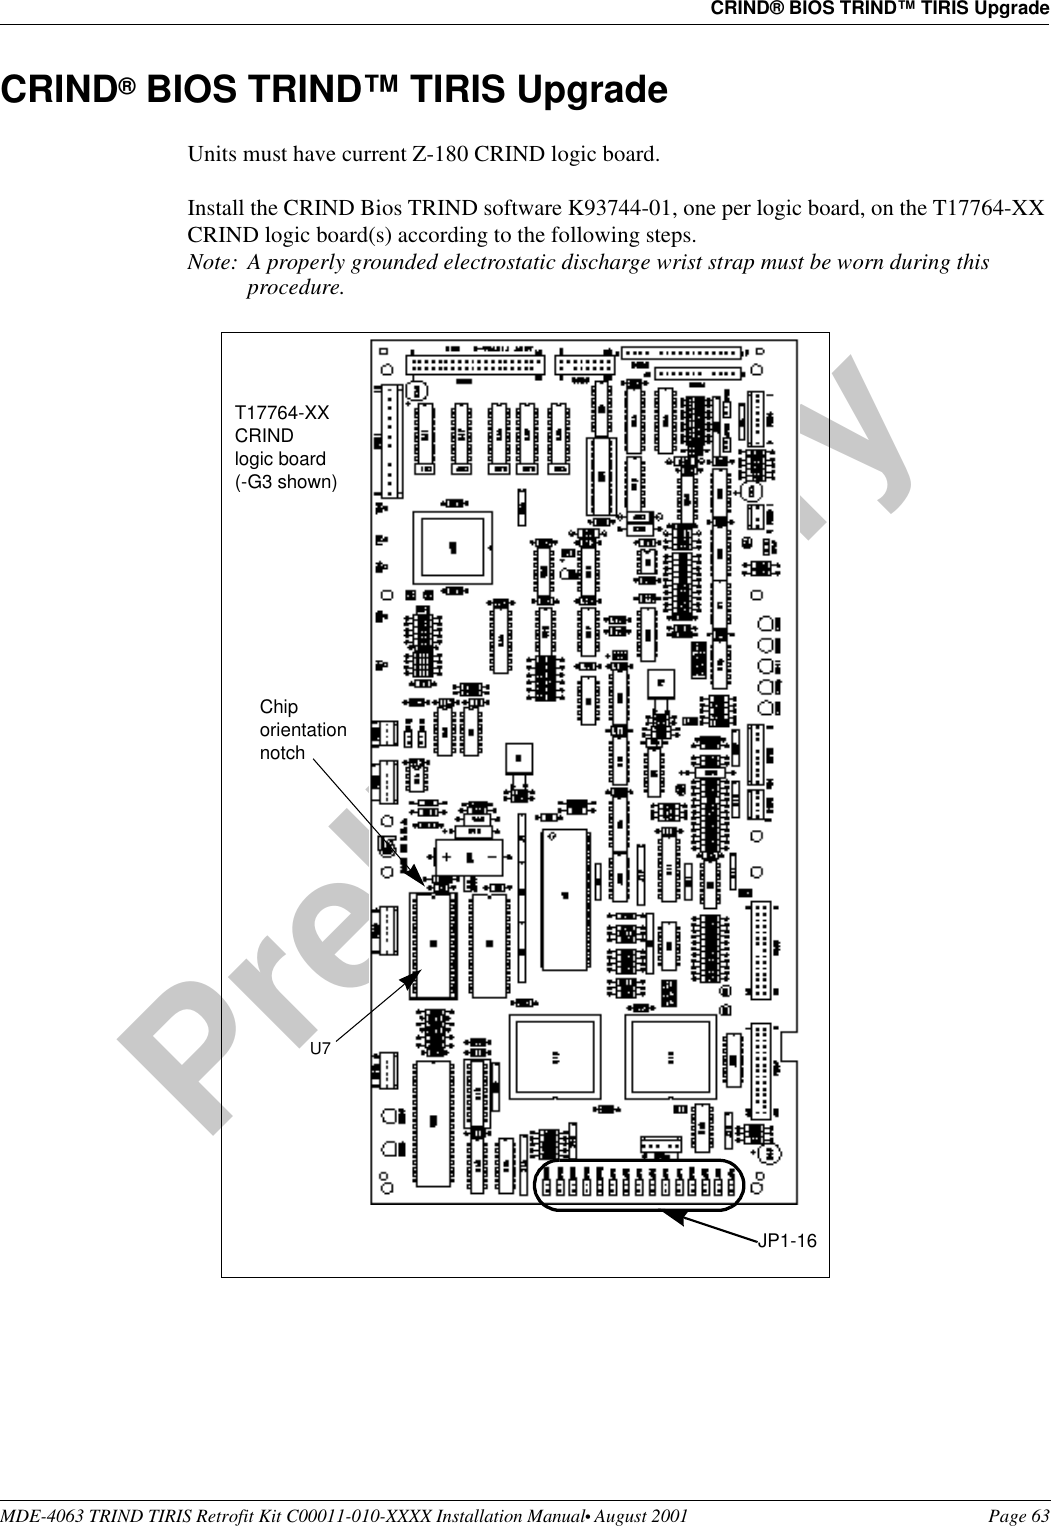 MDE-4063 TRIND TIRIS Retrofit Kit C00011-010-XXXX Installation Manual• August 2001 Page 63CRIND® BIOS TRIND™ TIRIS UpgradePreliminary08-24-01CRIND® BIOS TRIND™ TIRIS UpgradeUnits must have current Z-180 CRIND logic board. Install the CRIND Bios TRIND software K93744-01, one per logic board, on the T17764-XX CRIND logic board(s) according to the following steps.Note: A properly grounded electrostatic discharge wrist strap must be worn during this procedure. U7 Chip orientation notchT17764-XX CRIND logic board (-G3 shown)JP1-16